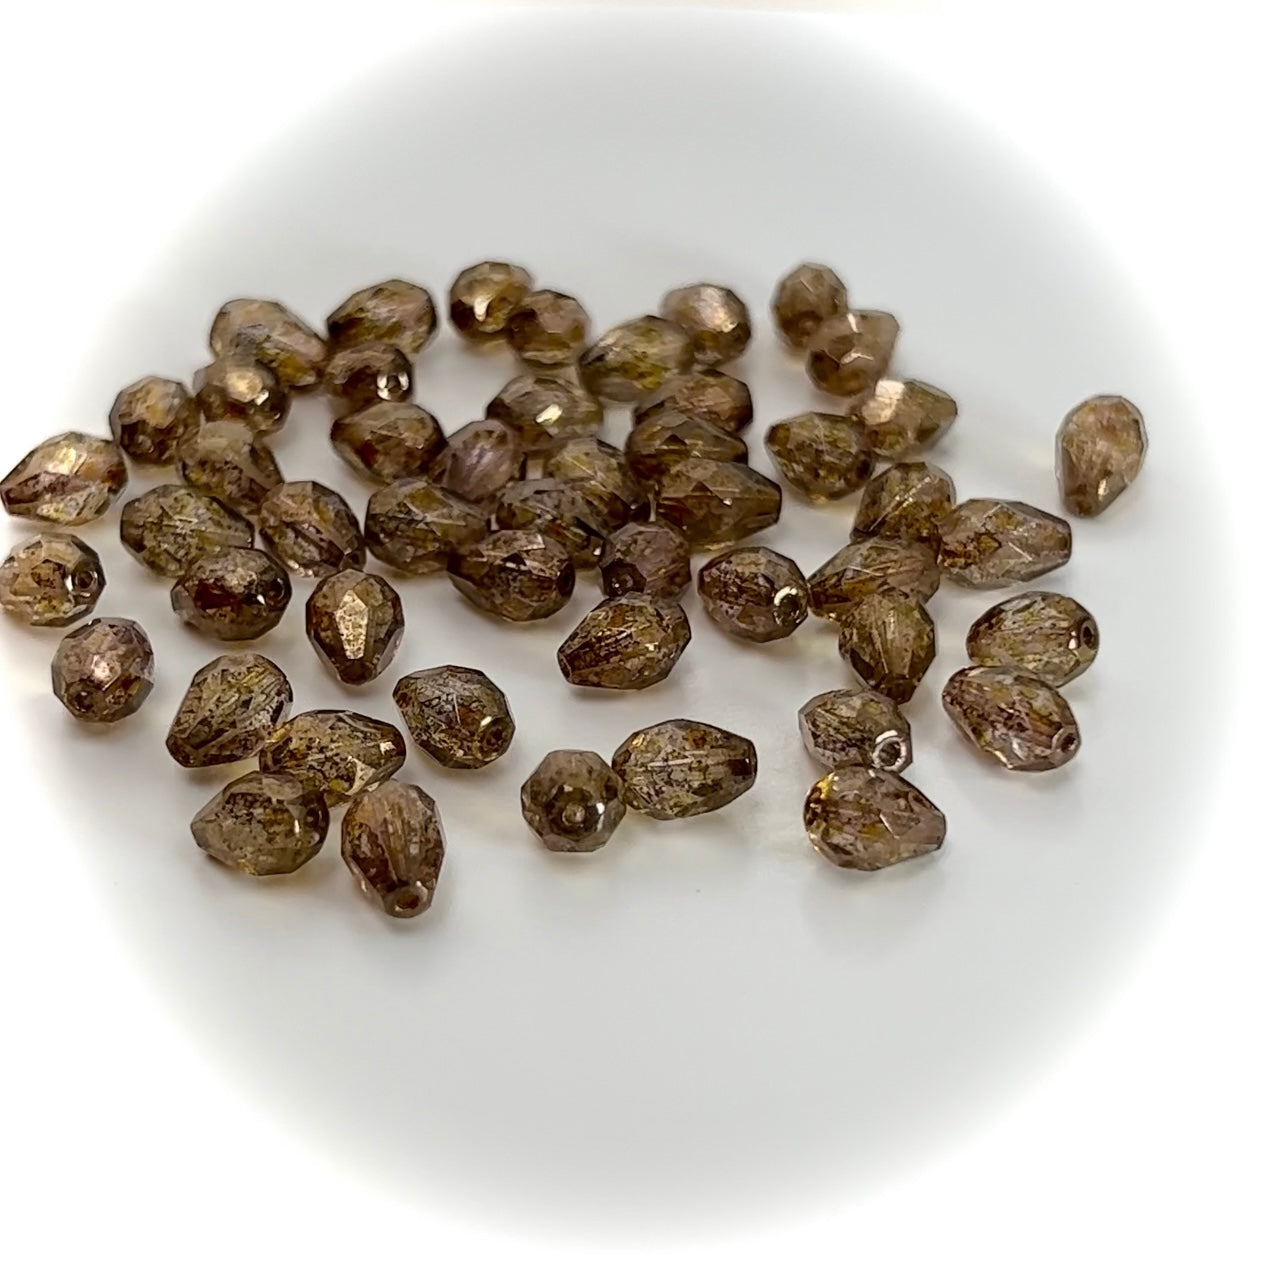 Czech Glass Pear Shaped Fire Polished Beads 9x7mm Crystal Senegal Luster coated brown Tear Drops, 50 pieces, J019